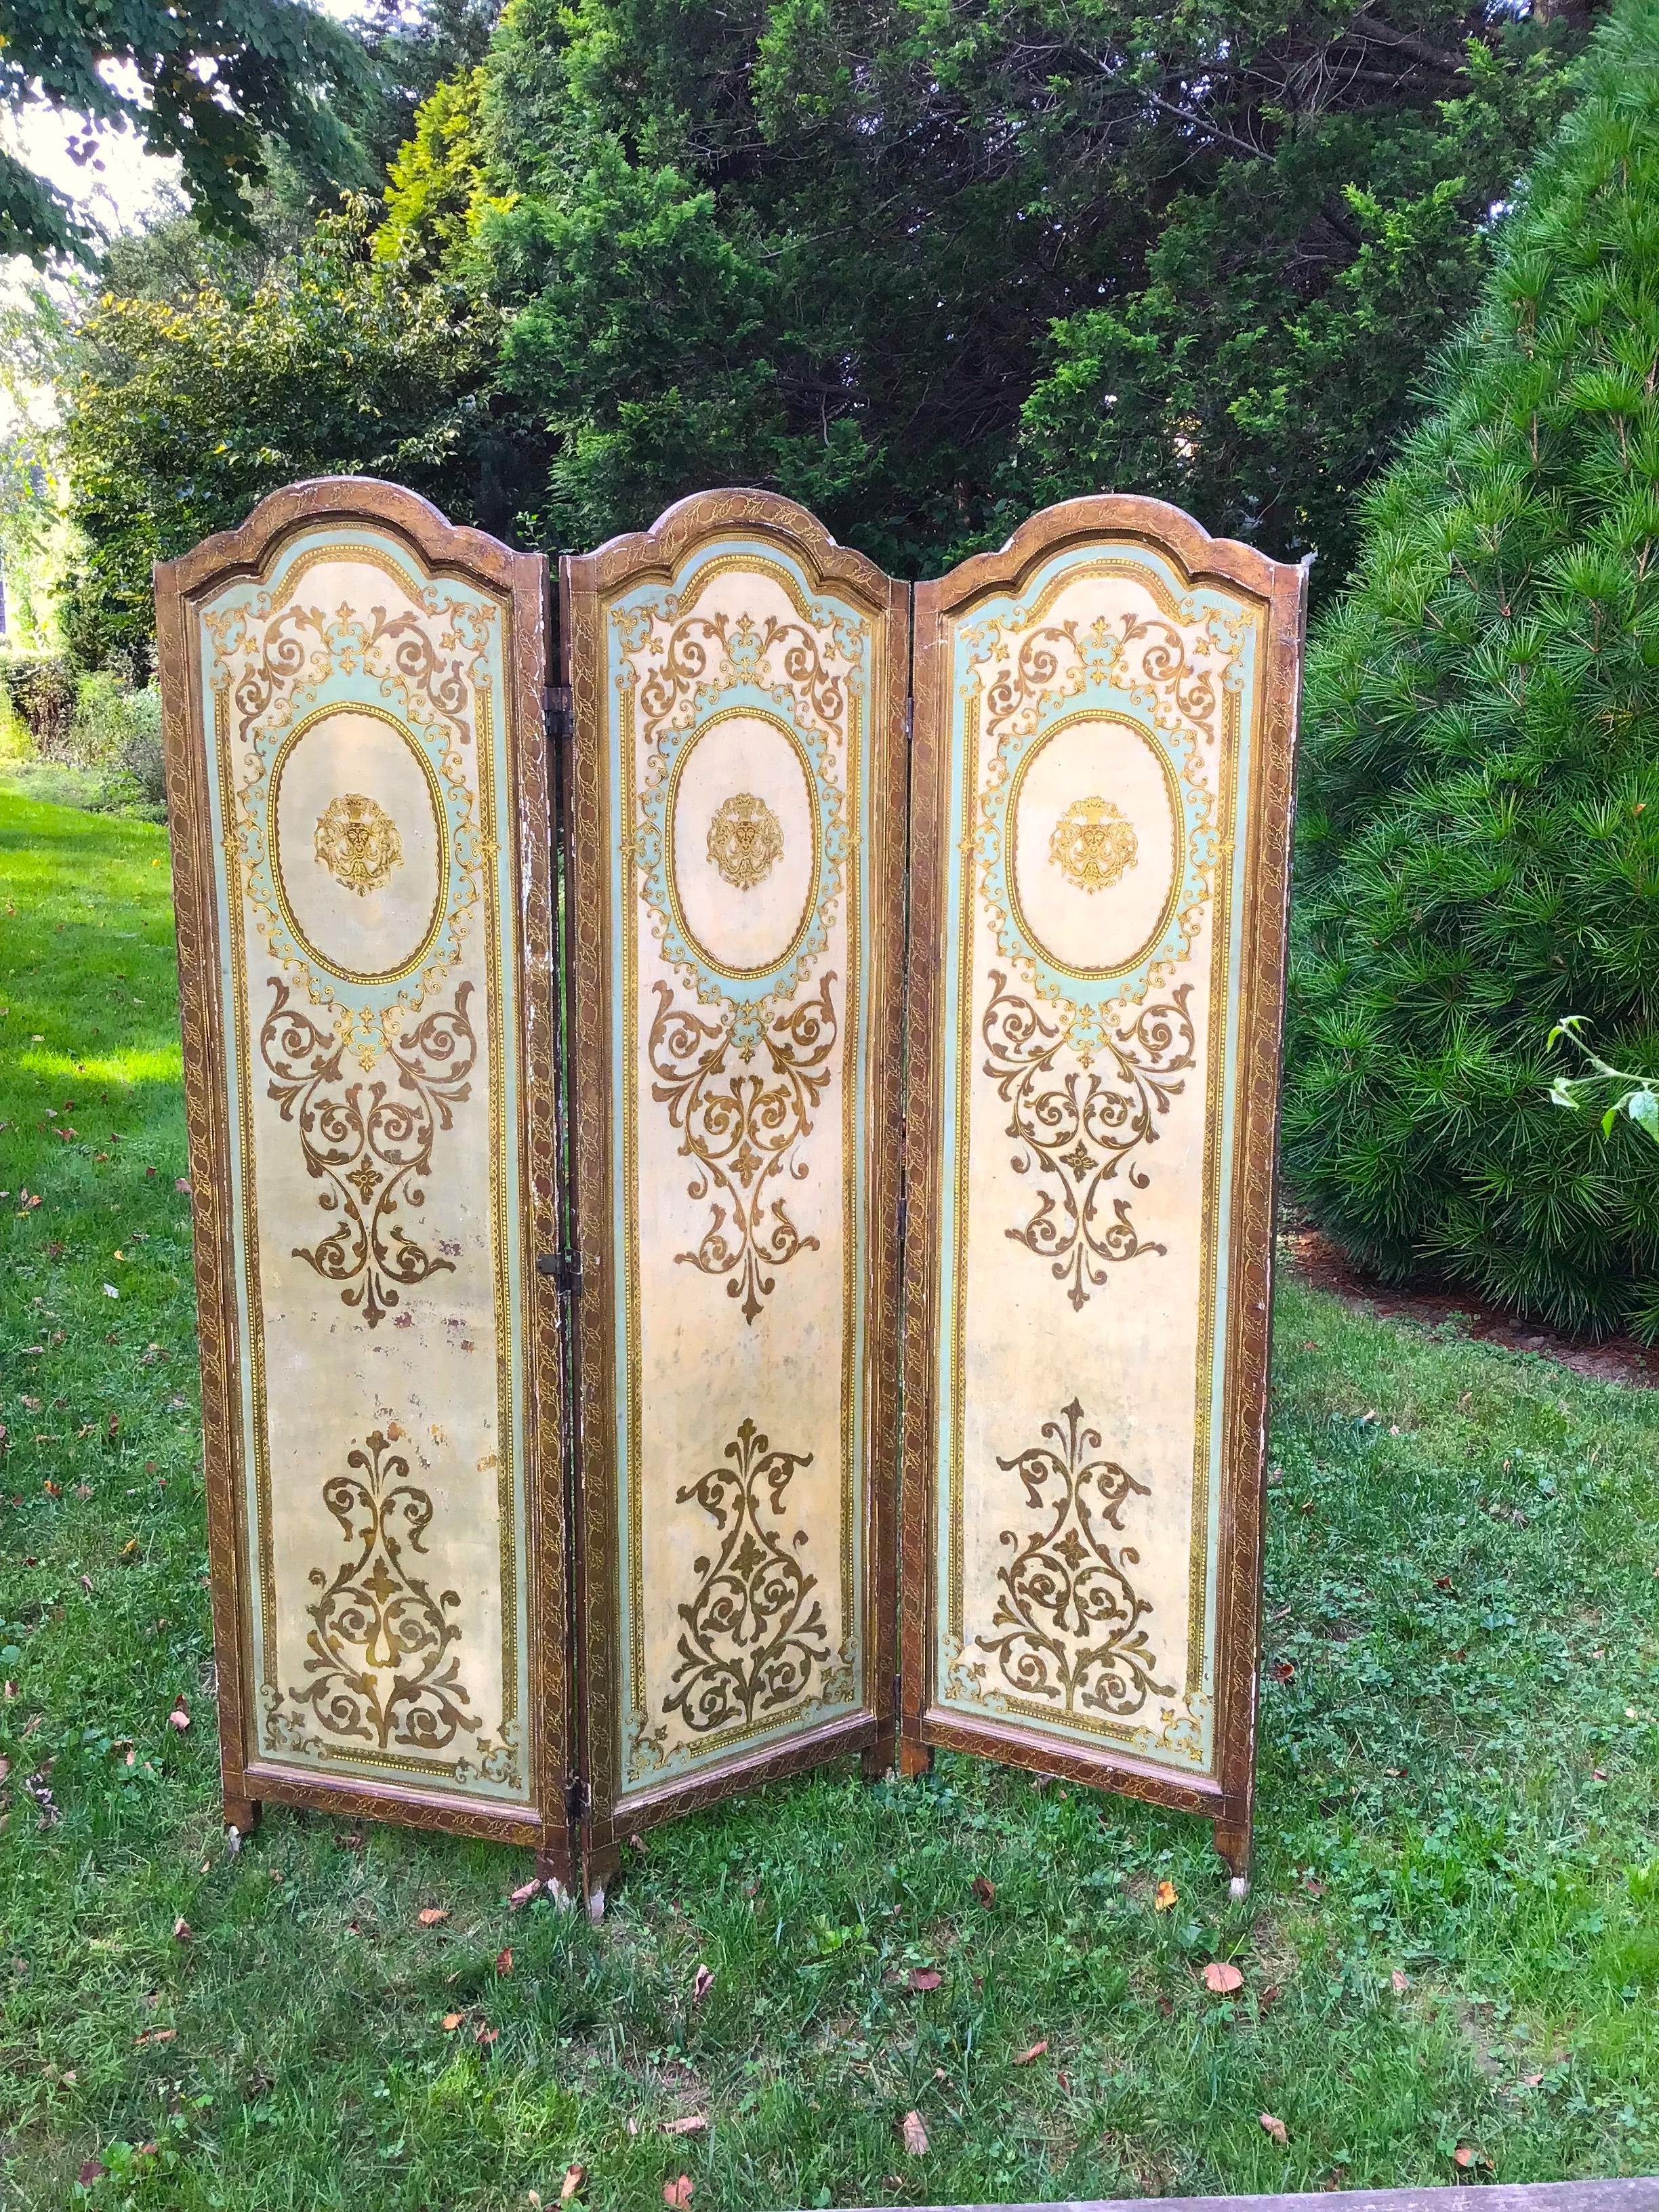 Florentine gold folding screen, Italian gilt boudoir screen, 3 panel room divider,
boudoir screen, dressing screen.

Please see photos for some cosmetic damage to feet and some missing hinge pins. Normal vintage wear on paint.